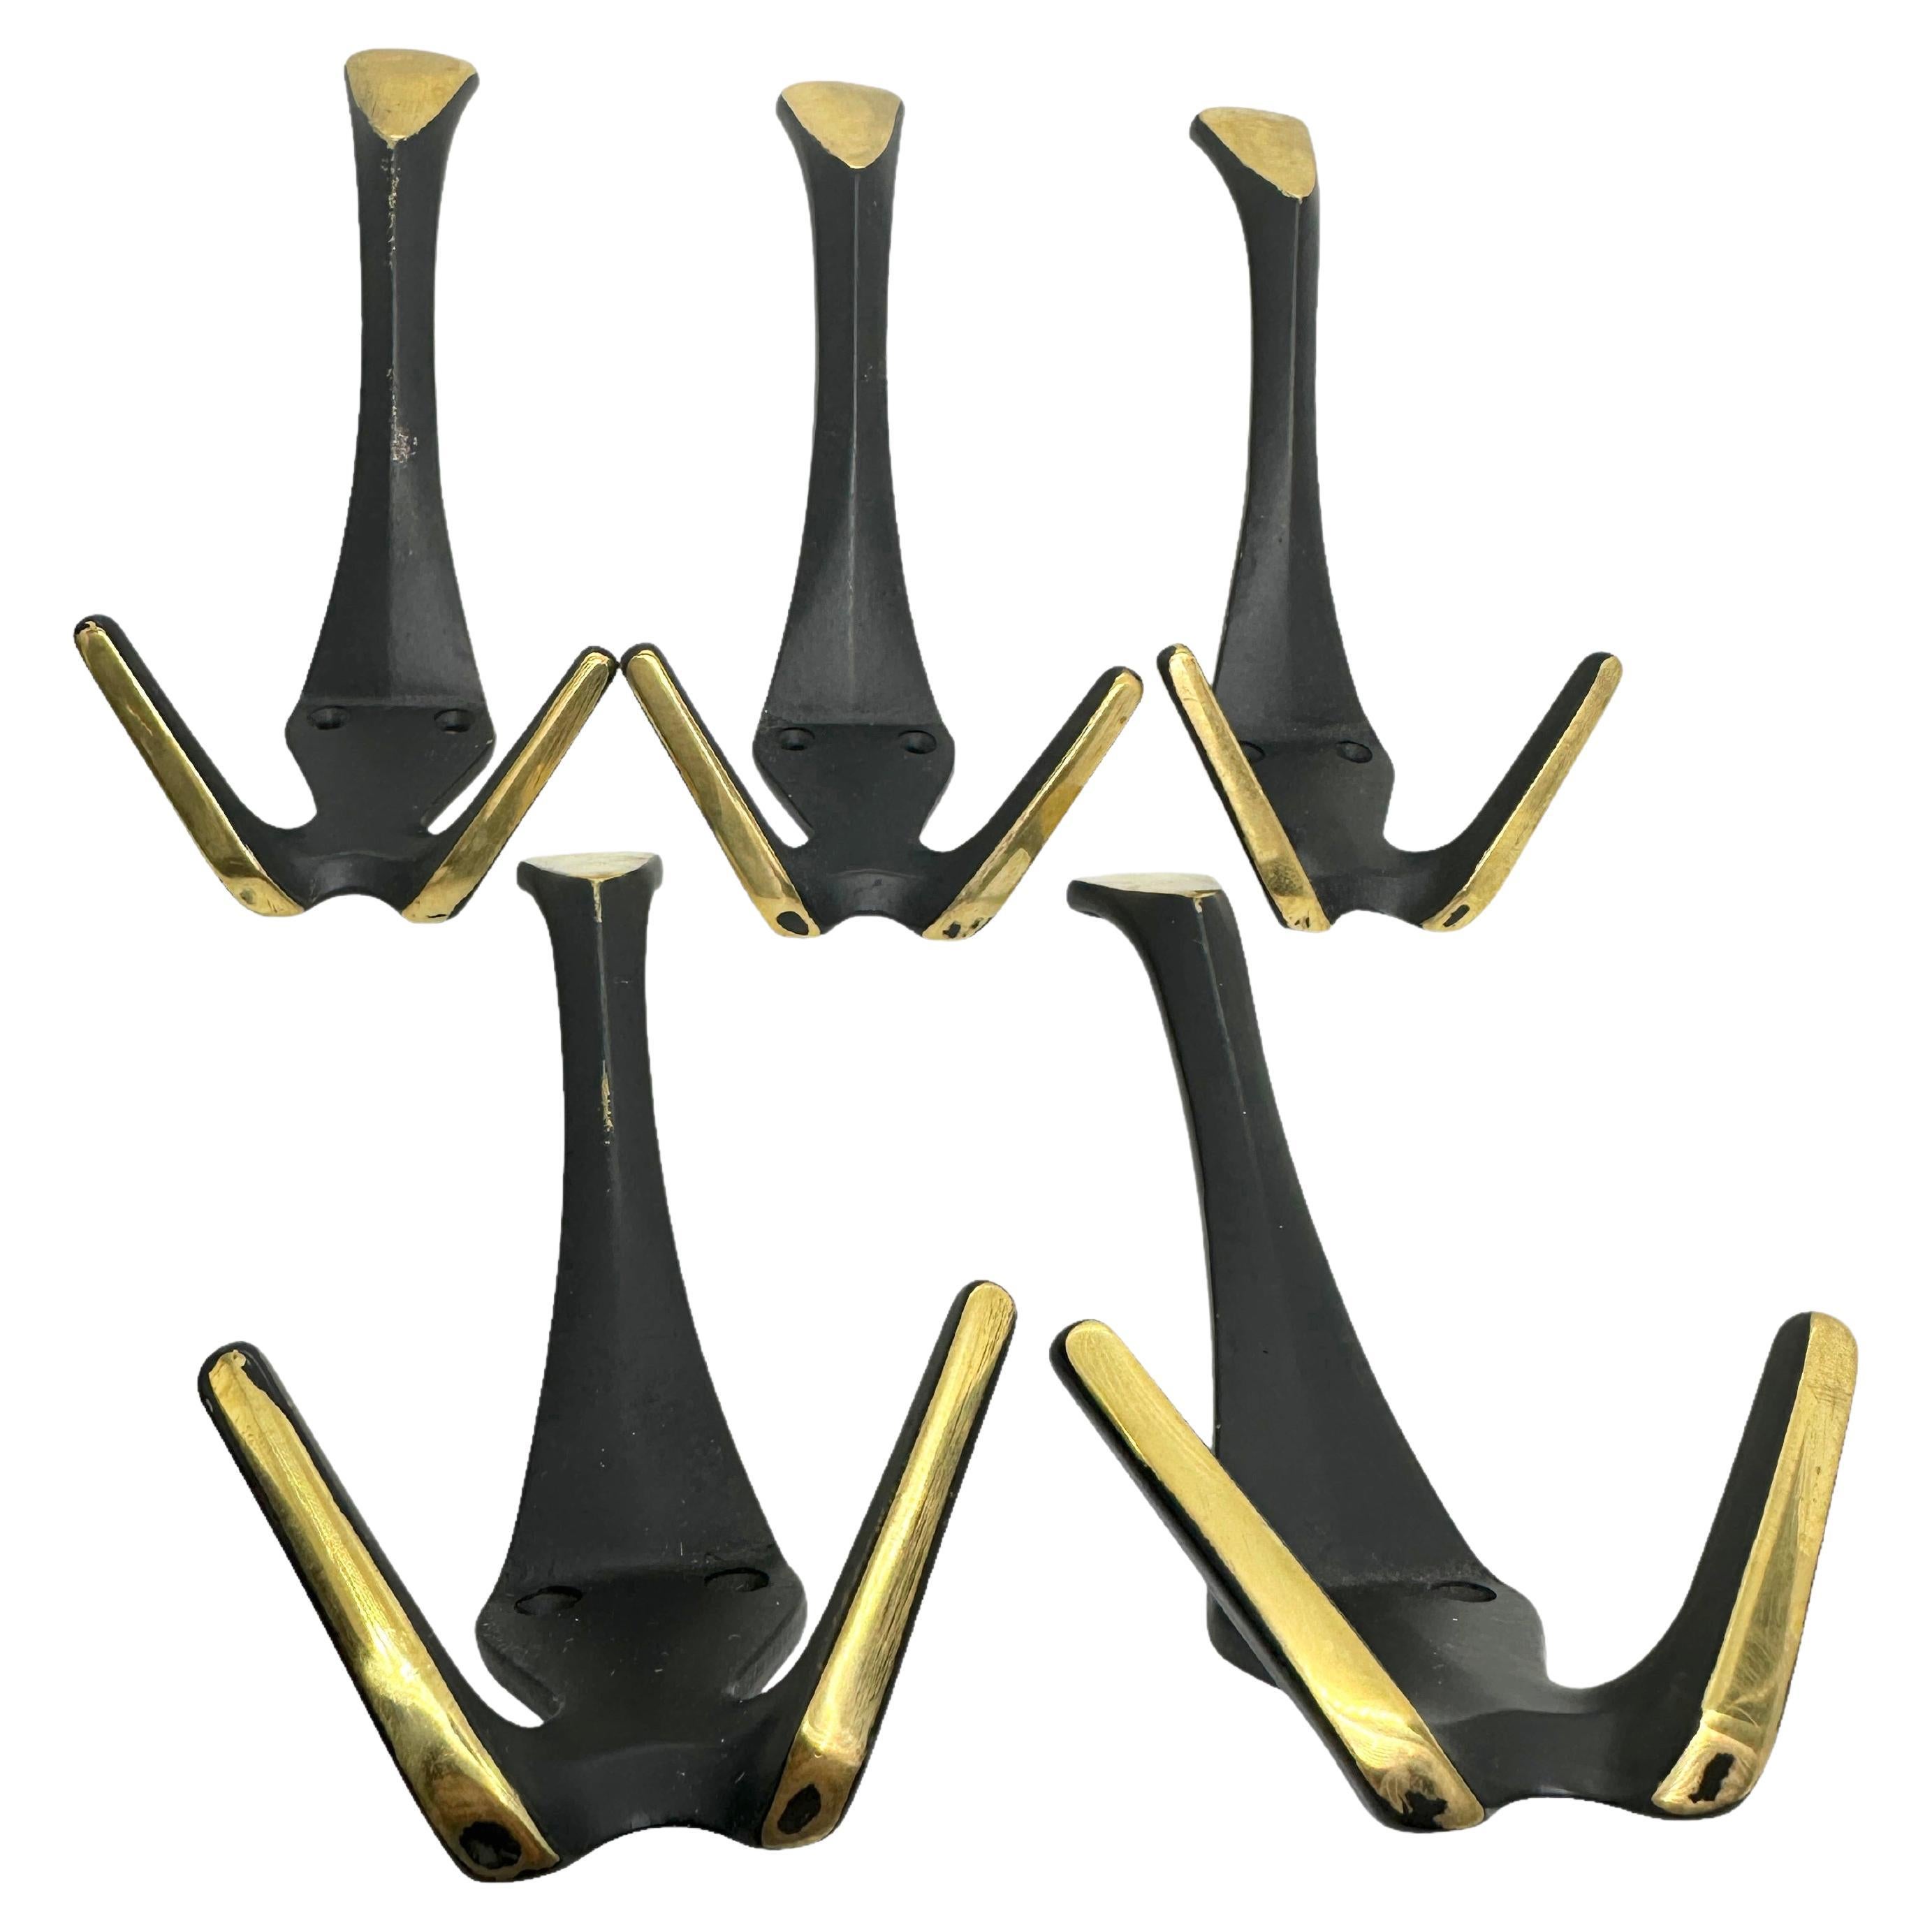 Set of Five Coat Wall Coat Hooks, Black and Brass, Mid-Century Modern, 1950s For Sale